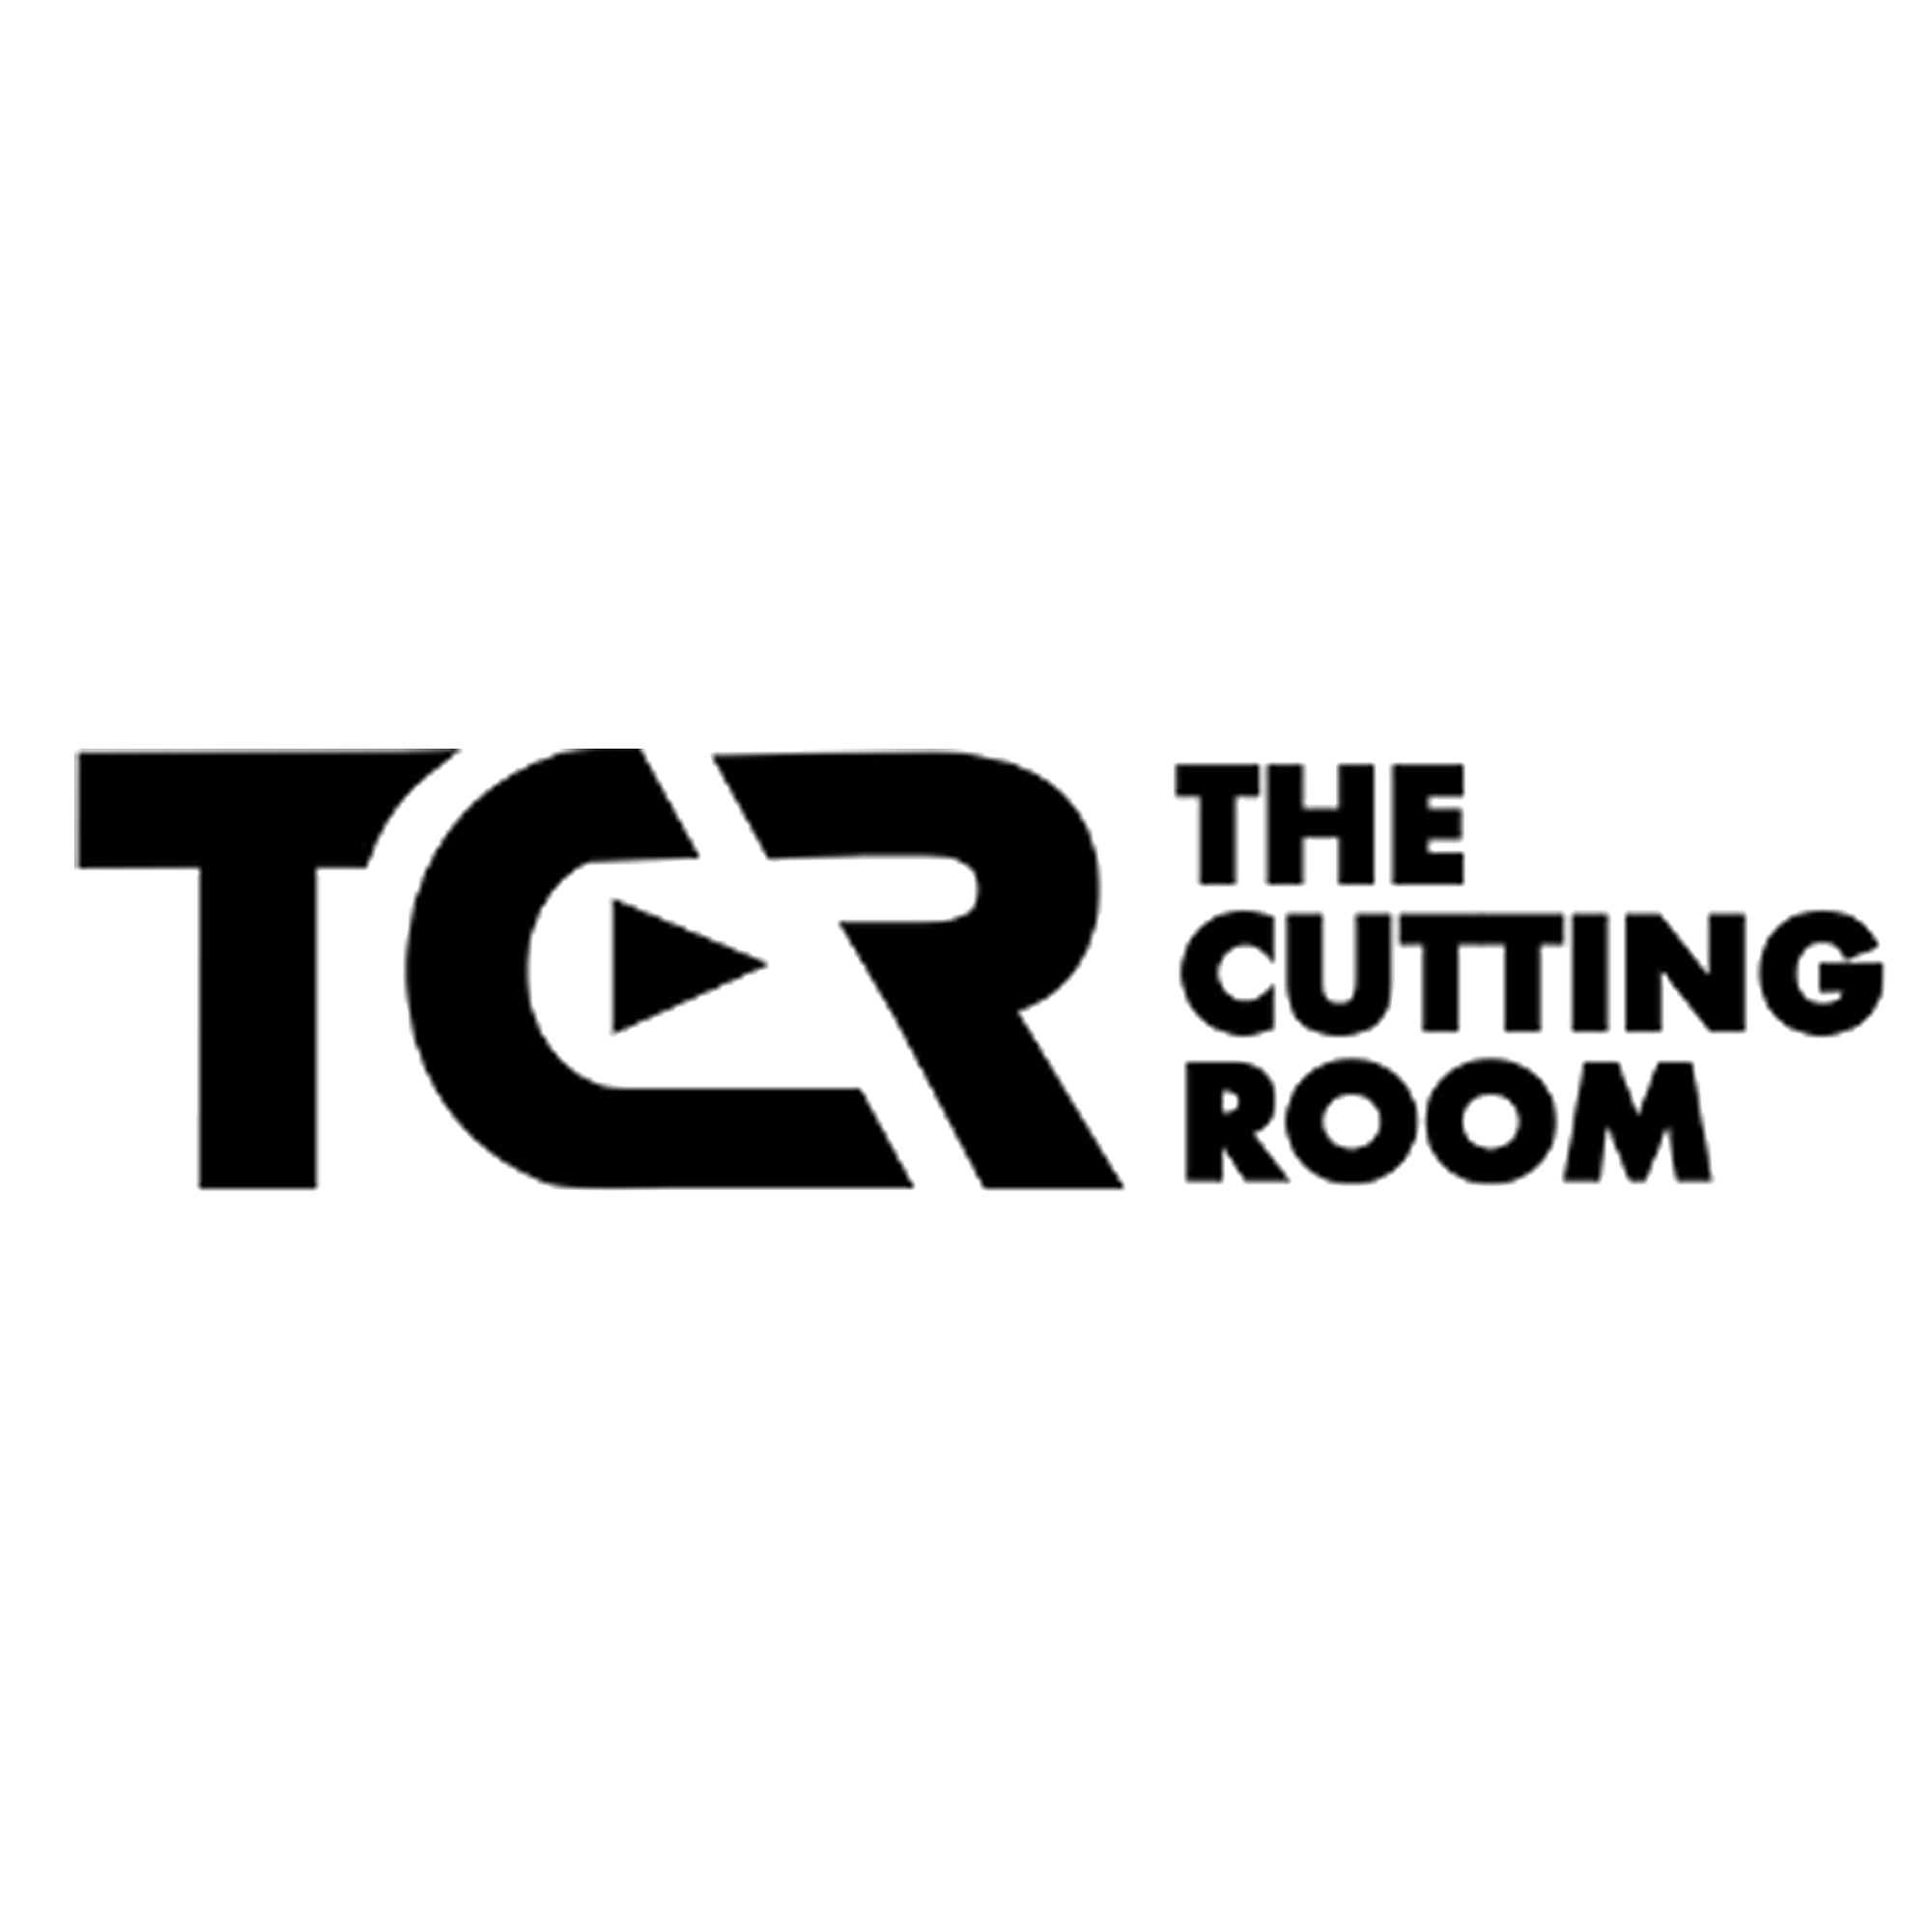 07The cutting room.png